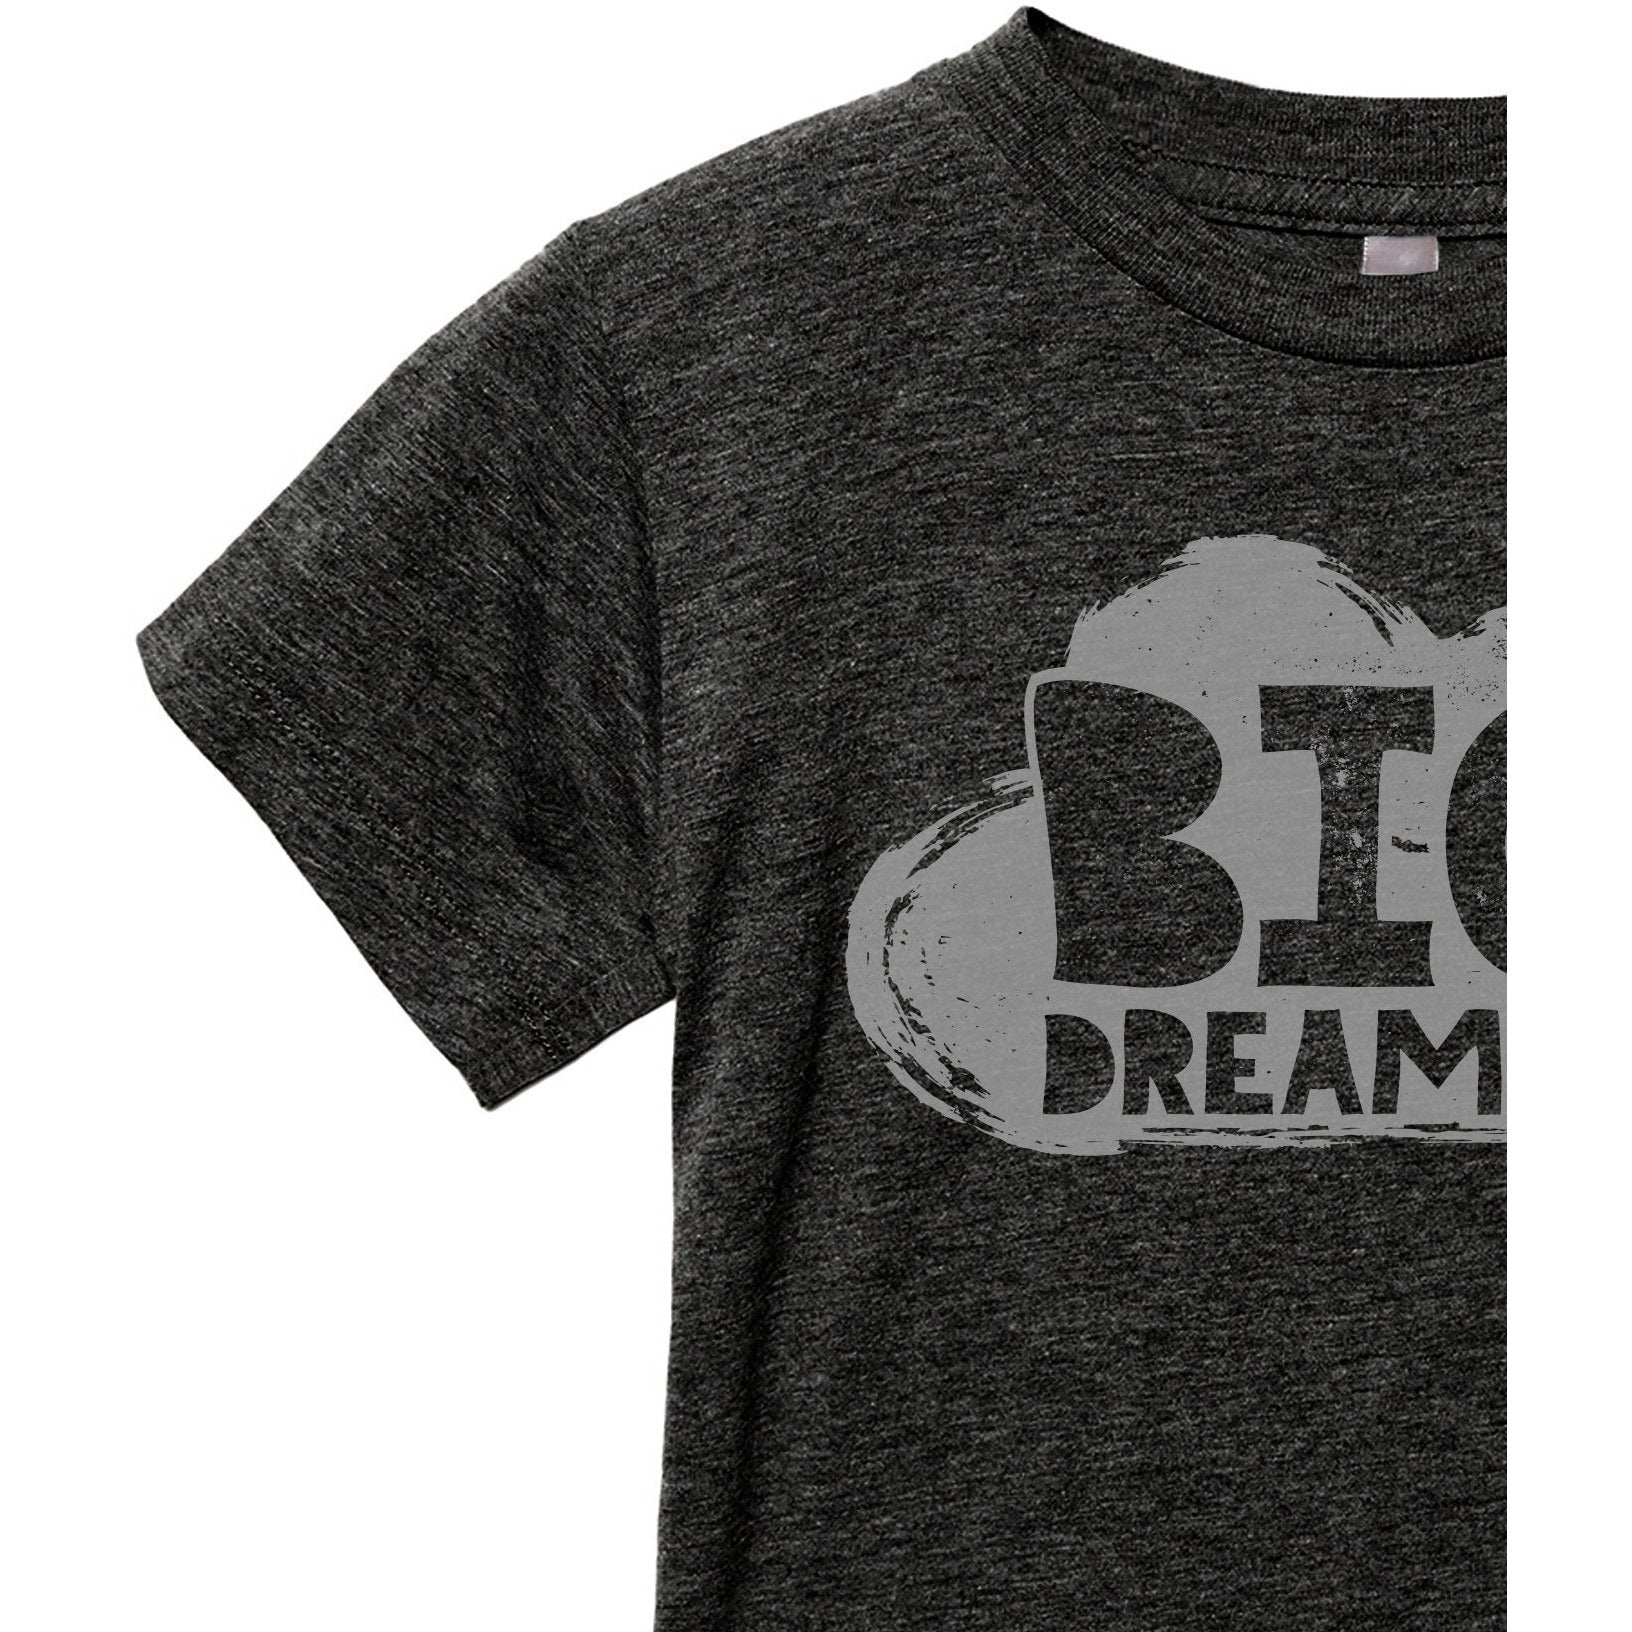 Big Dreamer Toddler's Go-To Crewneck Tee Charcoal Zoom Details A